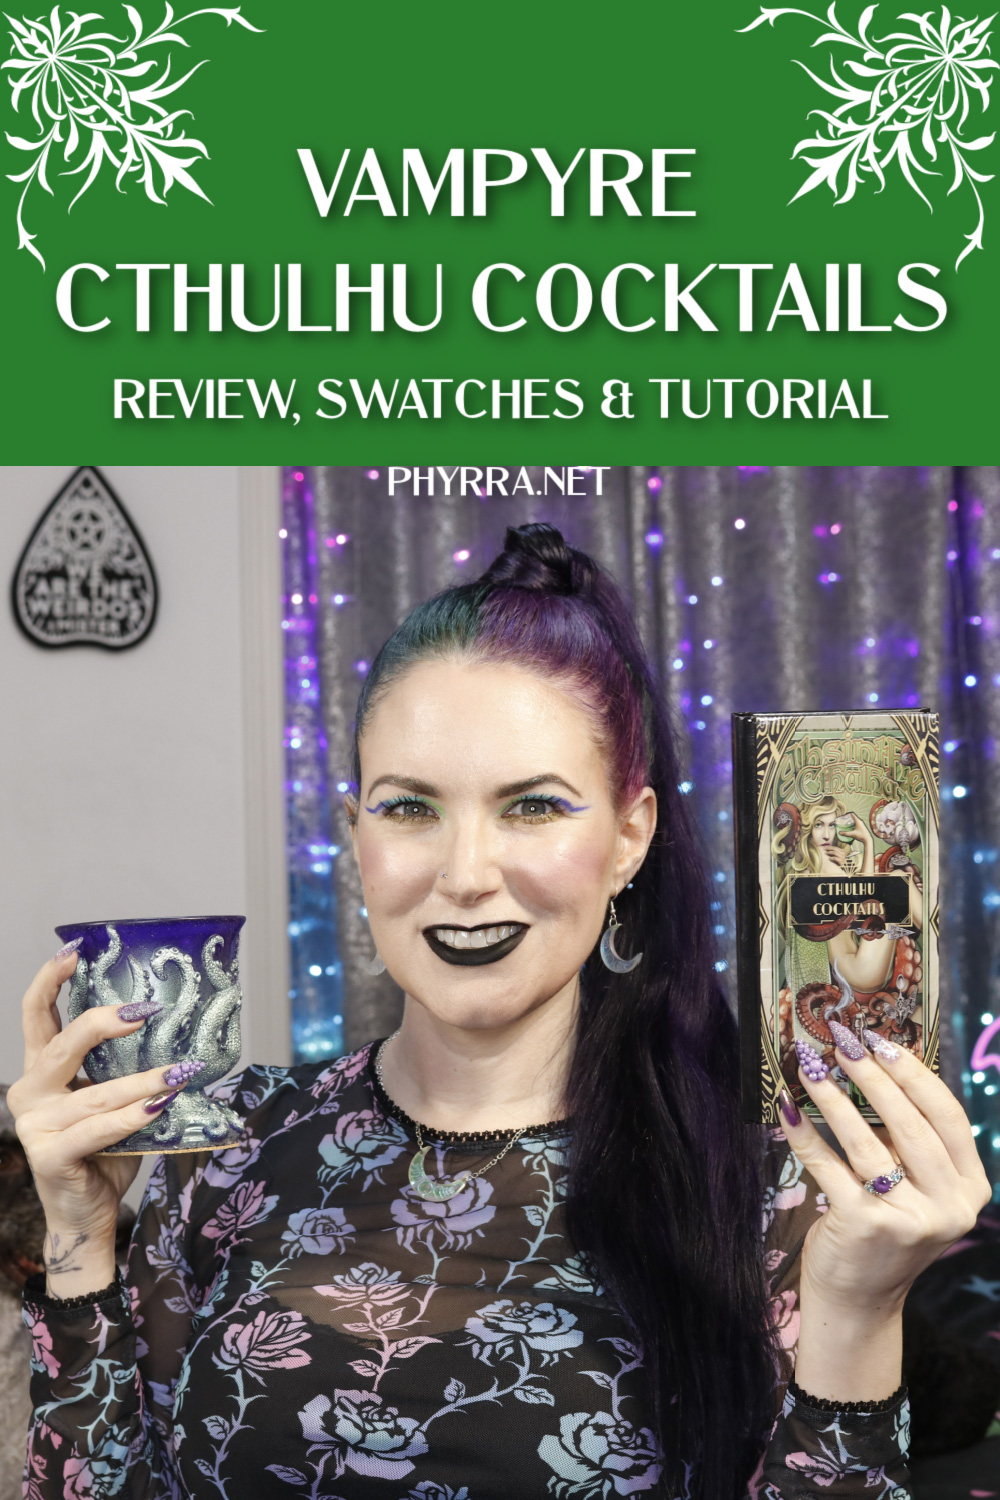 Vampyre Cosmetics Cthulhu Cocktails Palette Review, Swatches and Tutorial